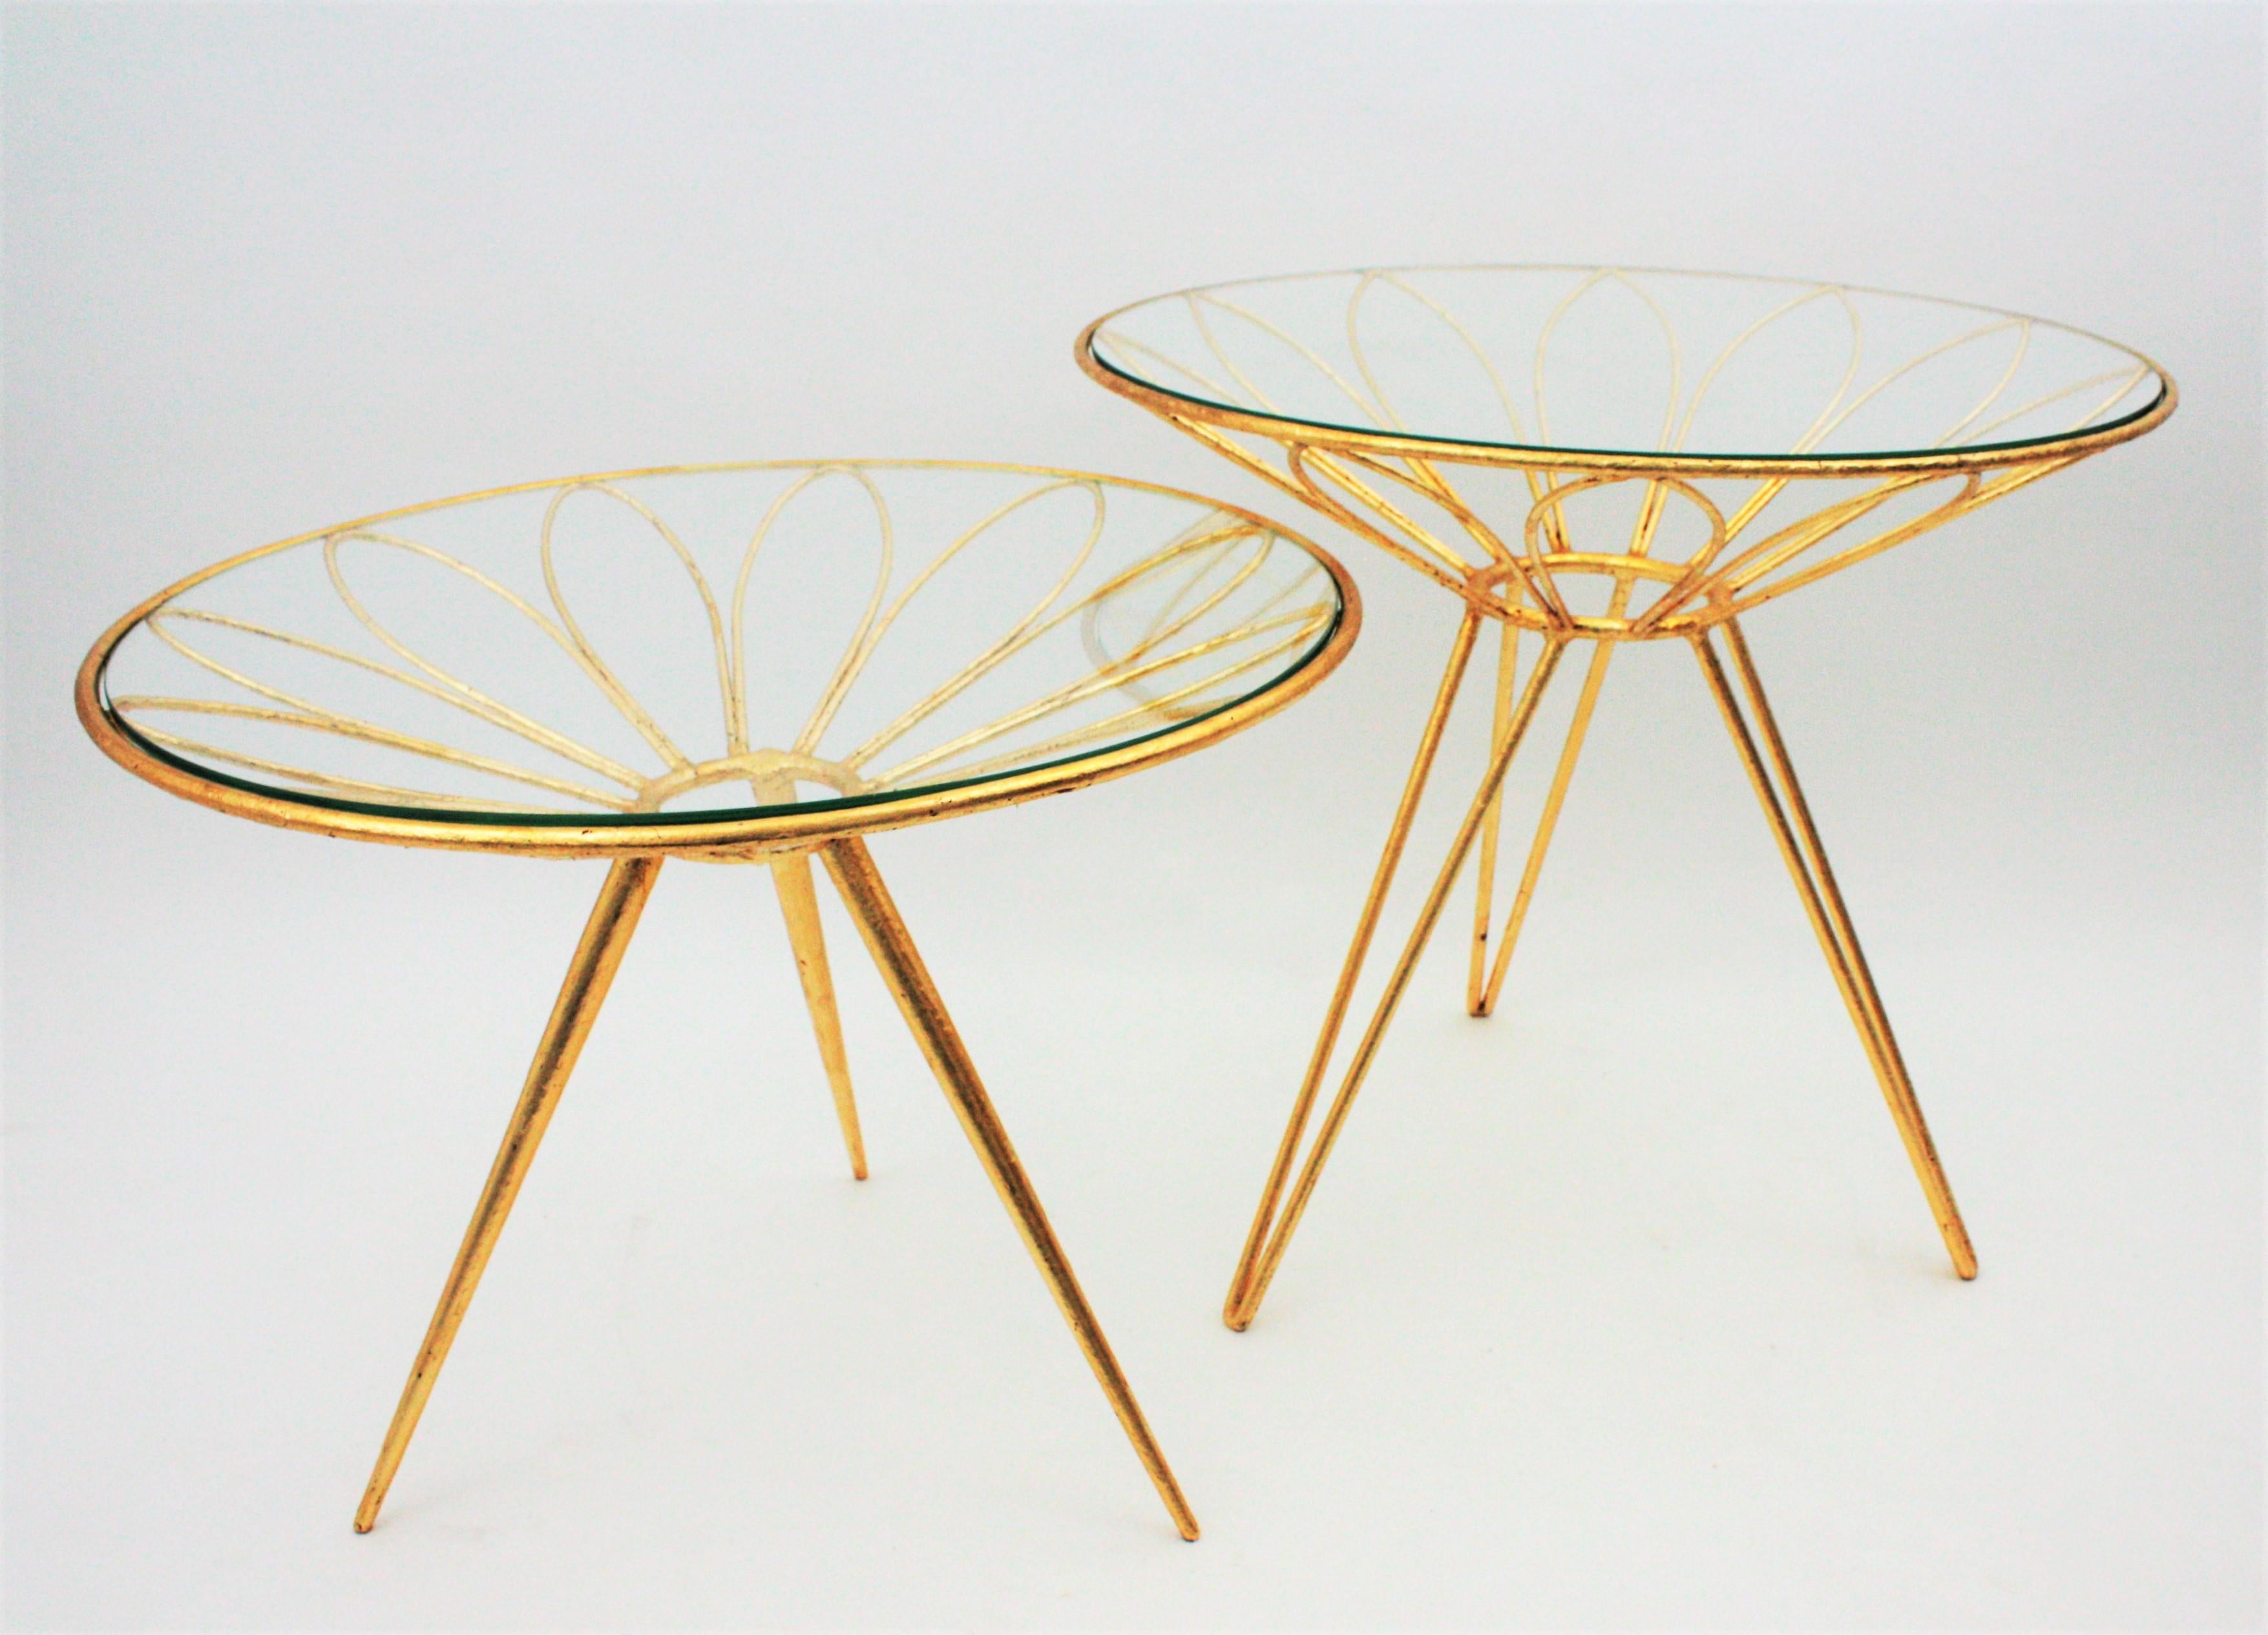 French Side Tables in Gilt Iron Daisy Flower Design, 1950s For Sale 7